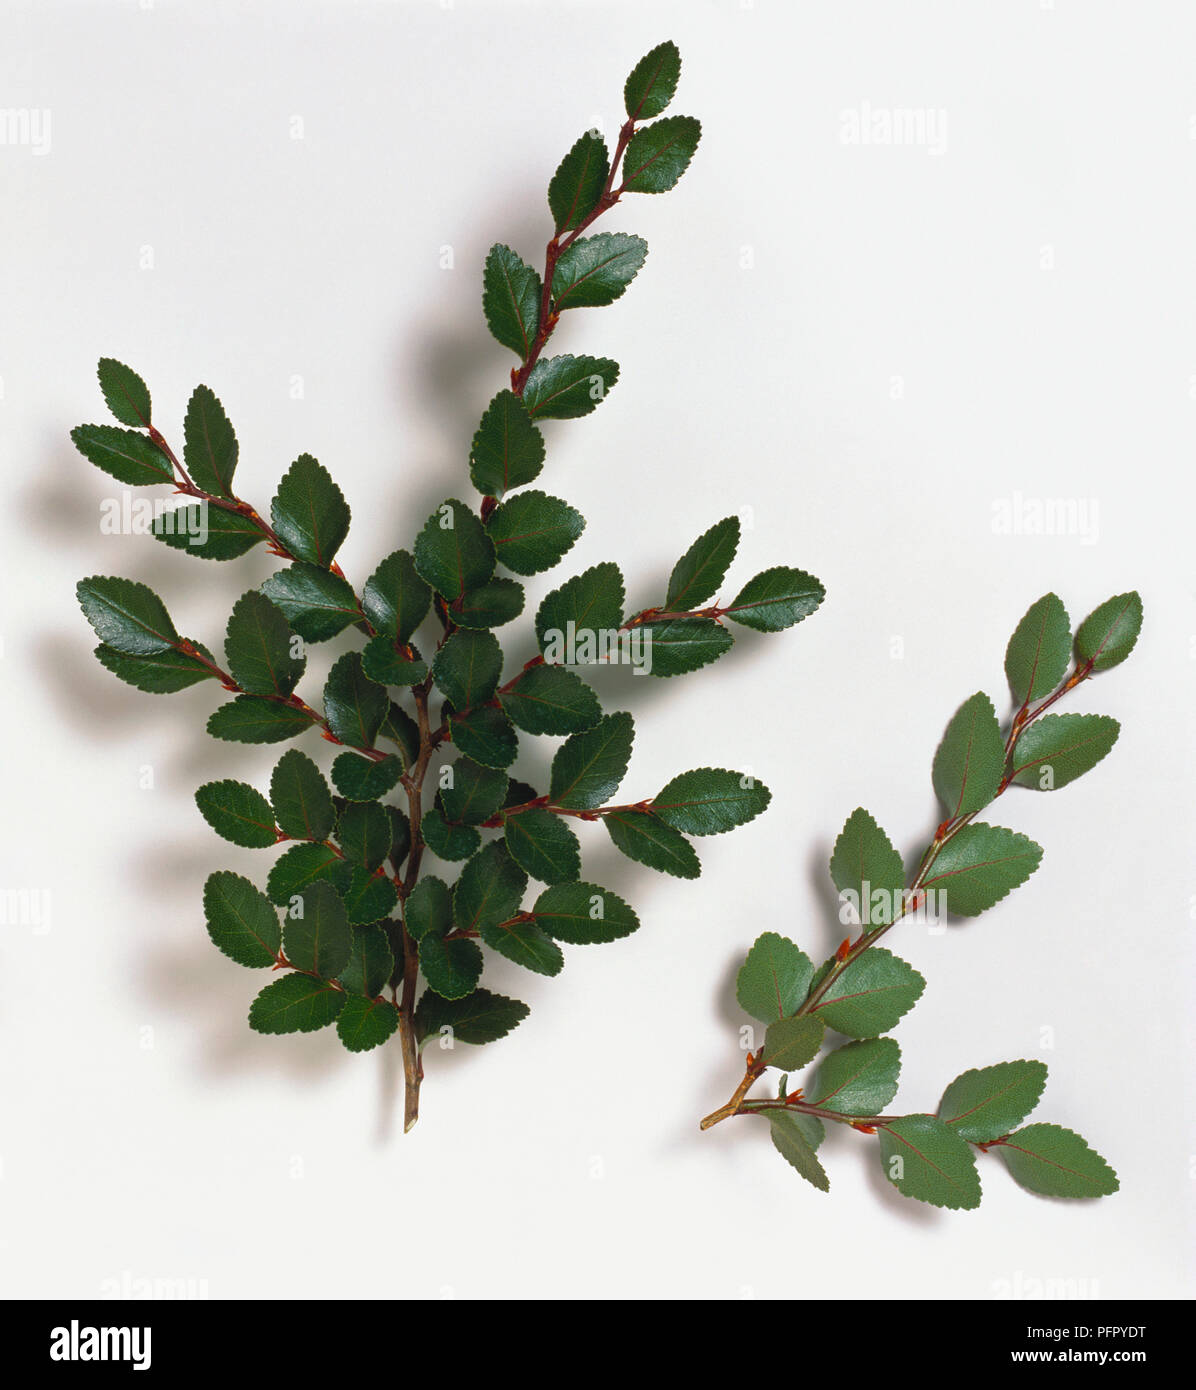 Nothofagus betuloides (Magellan's Beech) dark and pale green leaves on branching stems Stock Photo